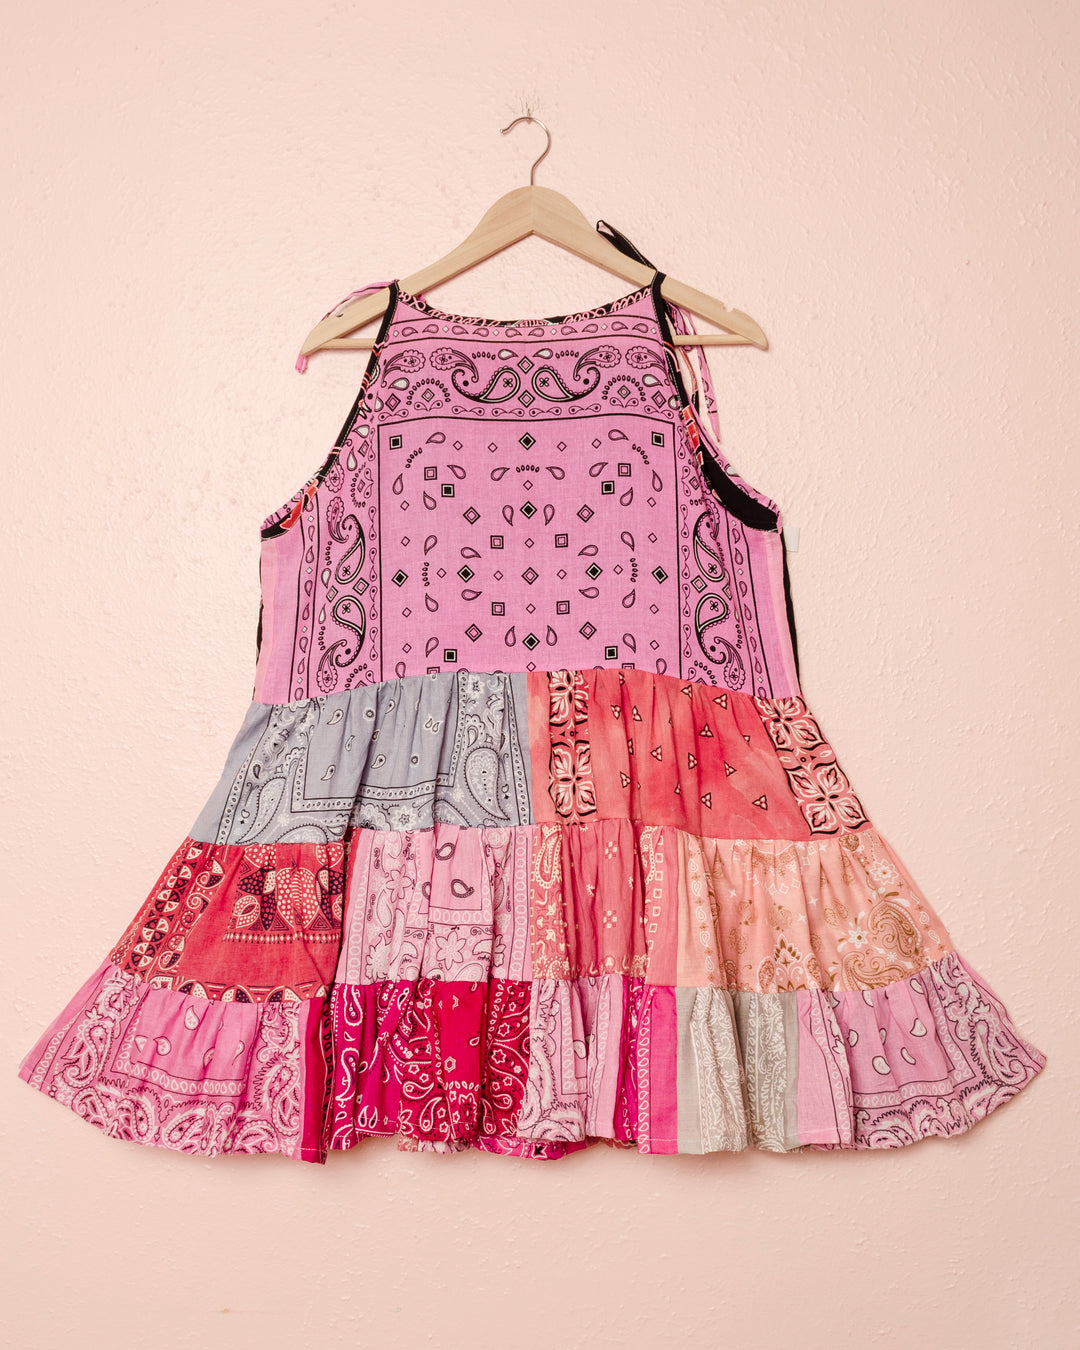 Dolly Bandana Dress - Mail in Your Own Materials